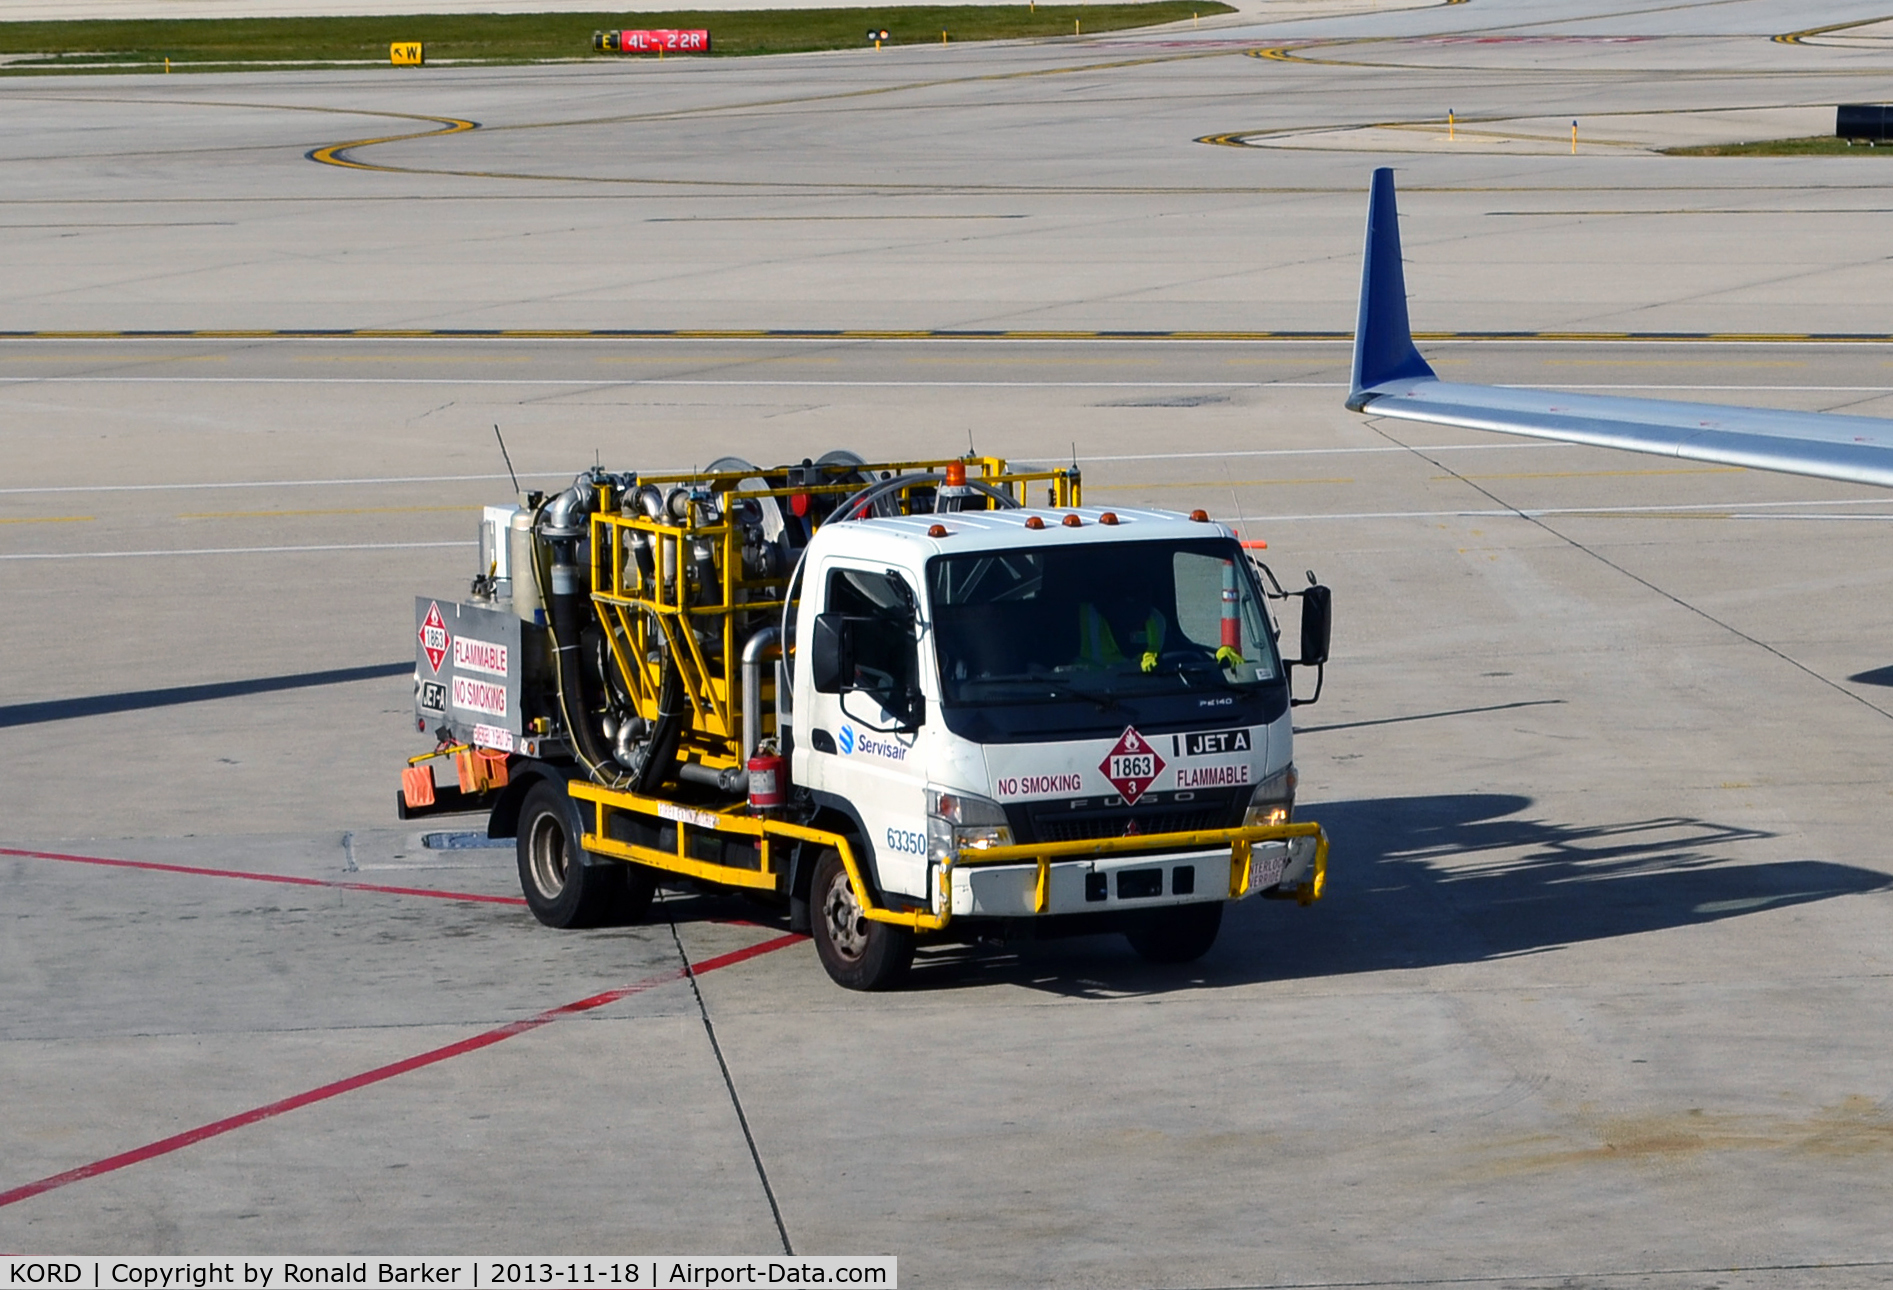 Chicago O'hare International Airport (ORD) - Refueling truck at O'Hare